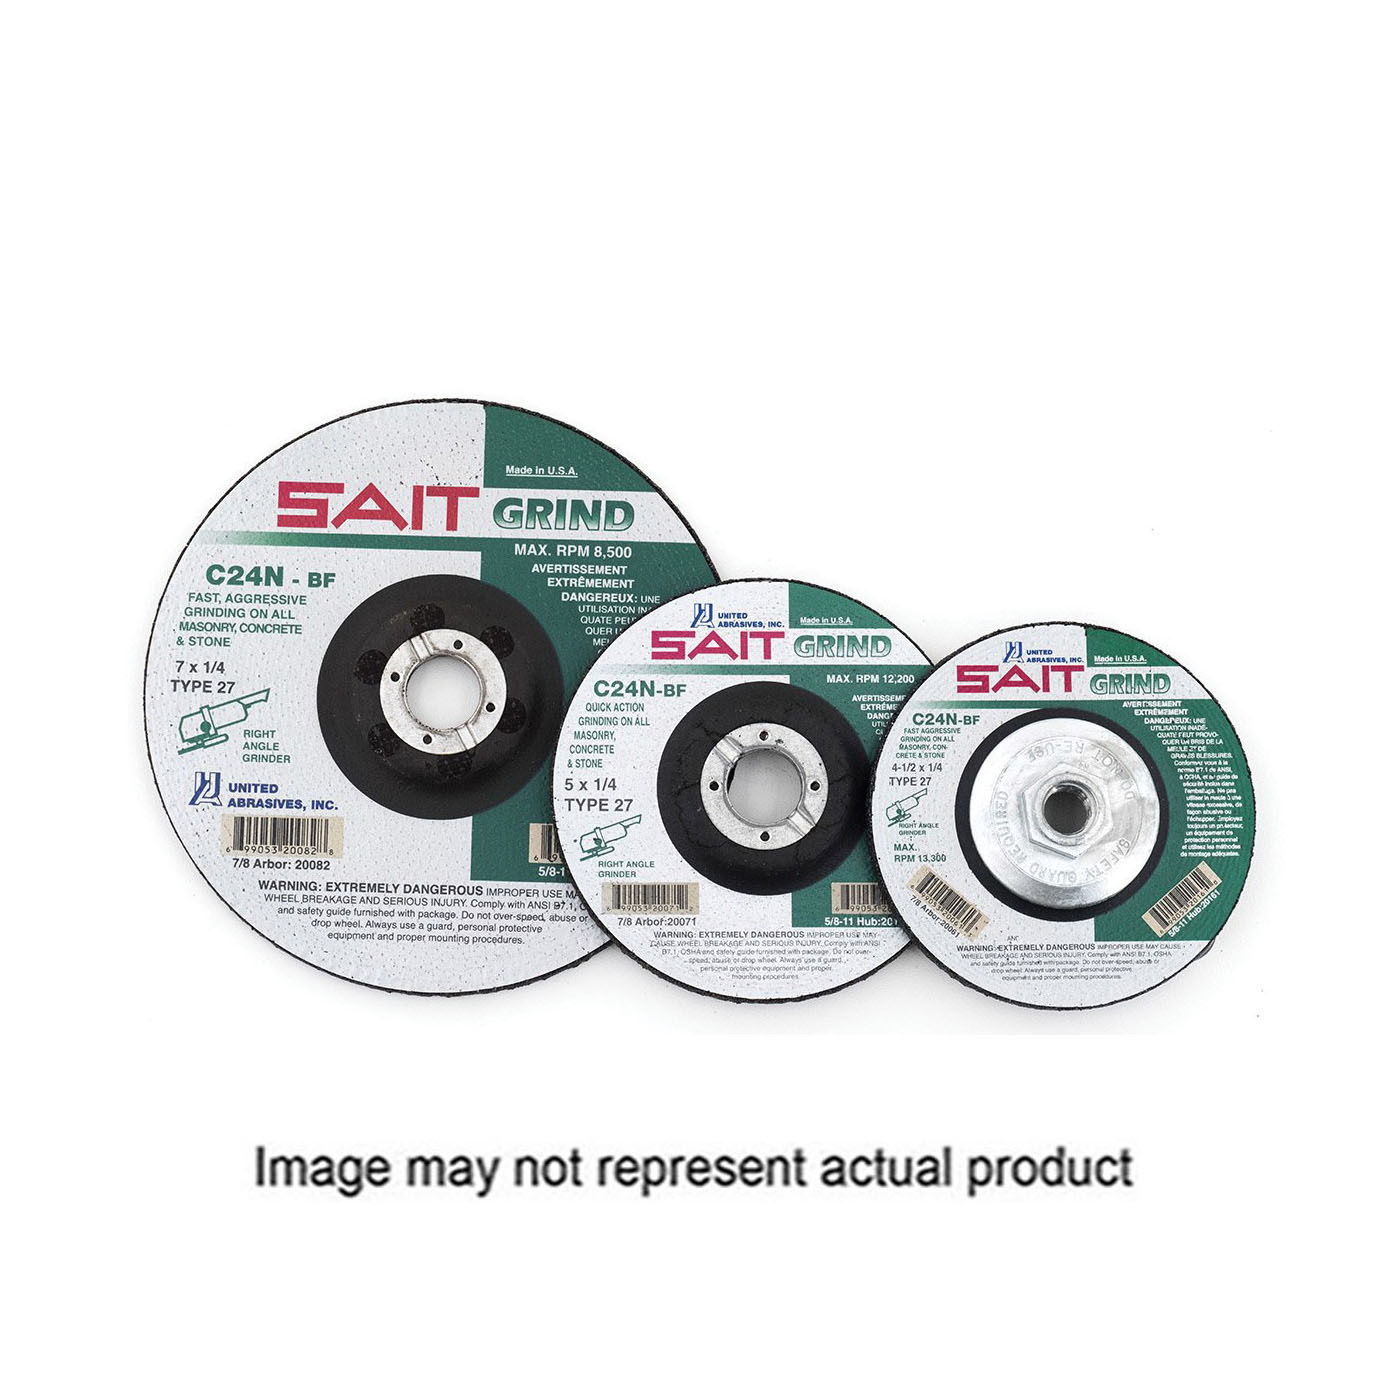 SAIT C24N 20061 Grinding Wheel, 4-1/2 in Dia, 1/4 in Thick, 7/8 in Arbor, 24 Grit, Silicon Carbide Abrasive - 1